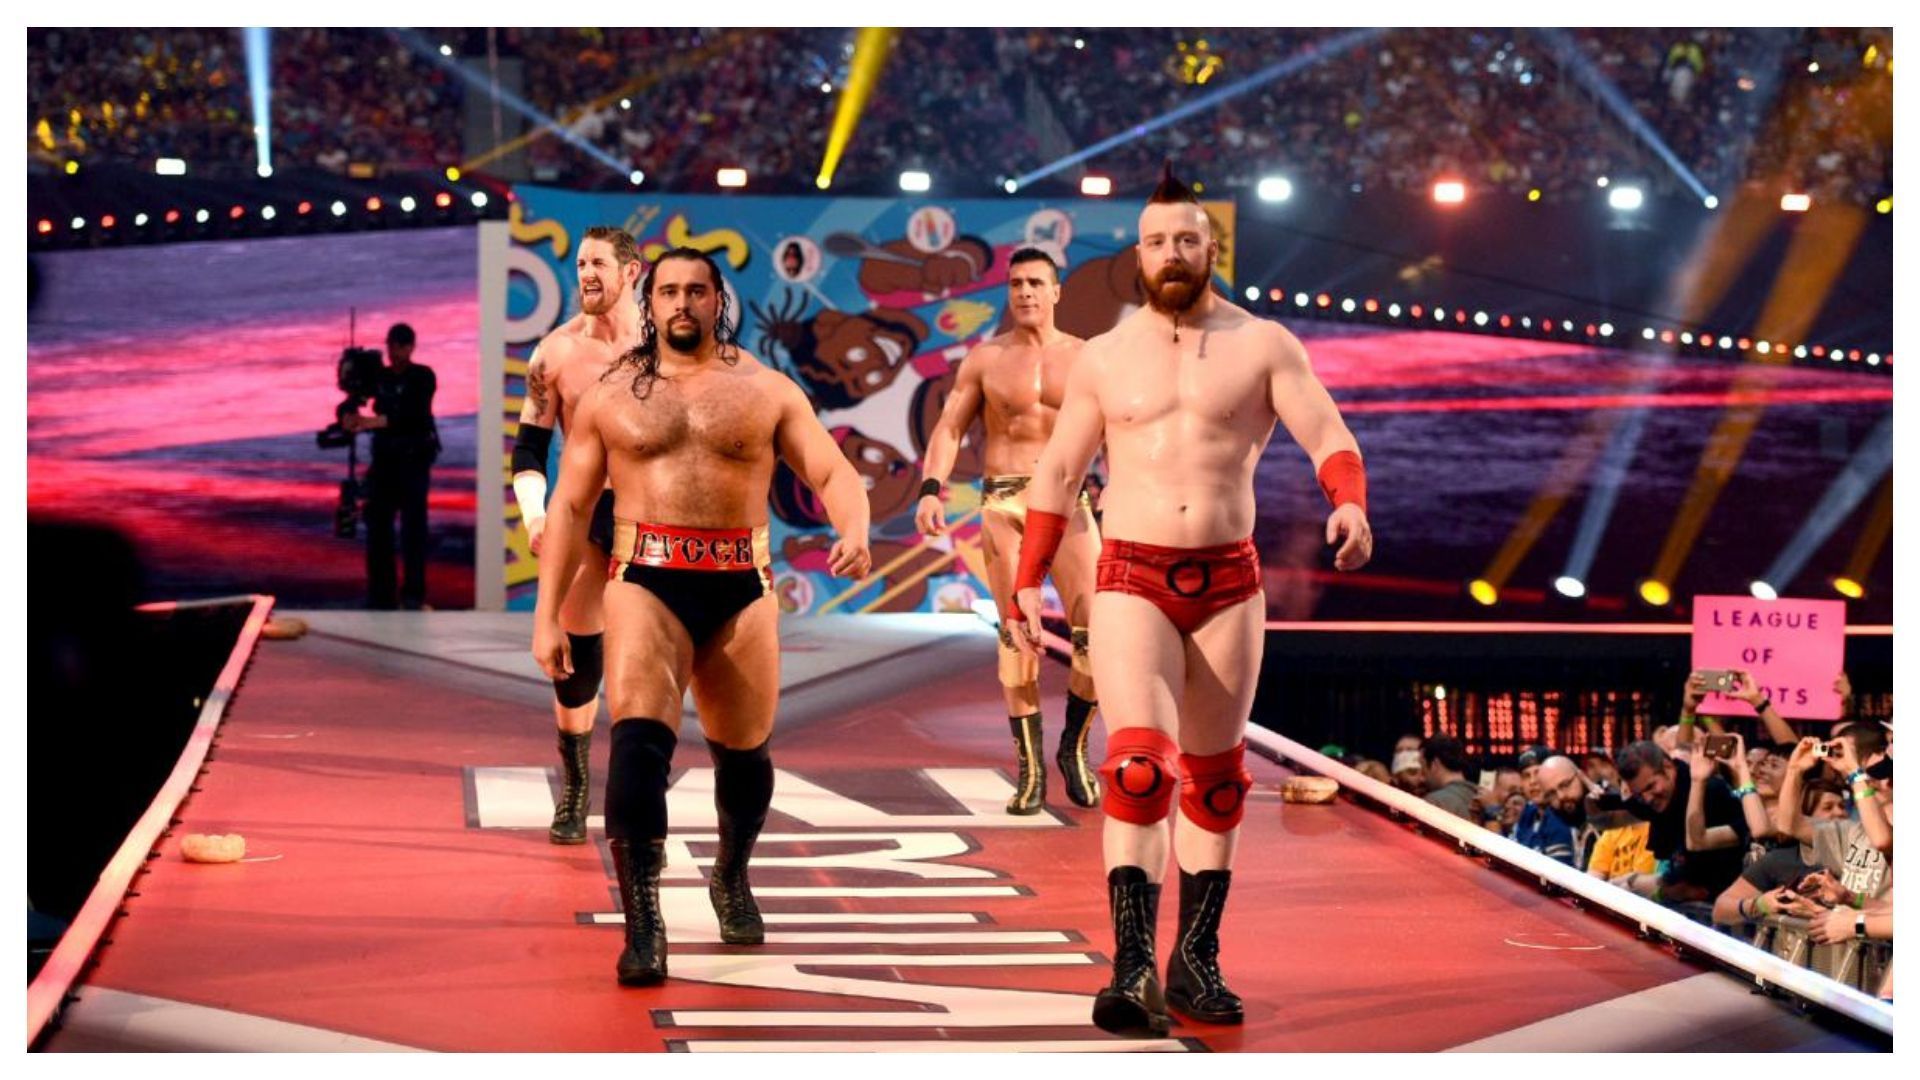 The League Of Nations make their entrance at WrestleMania 32